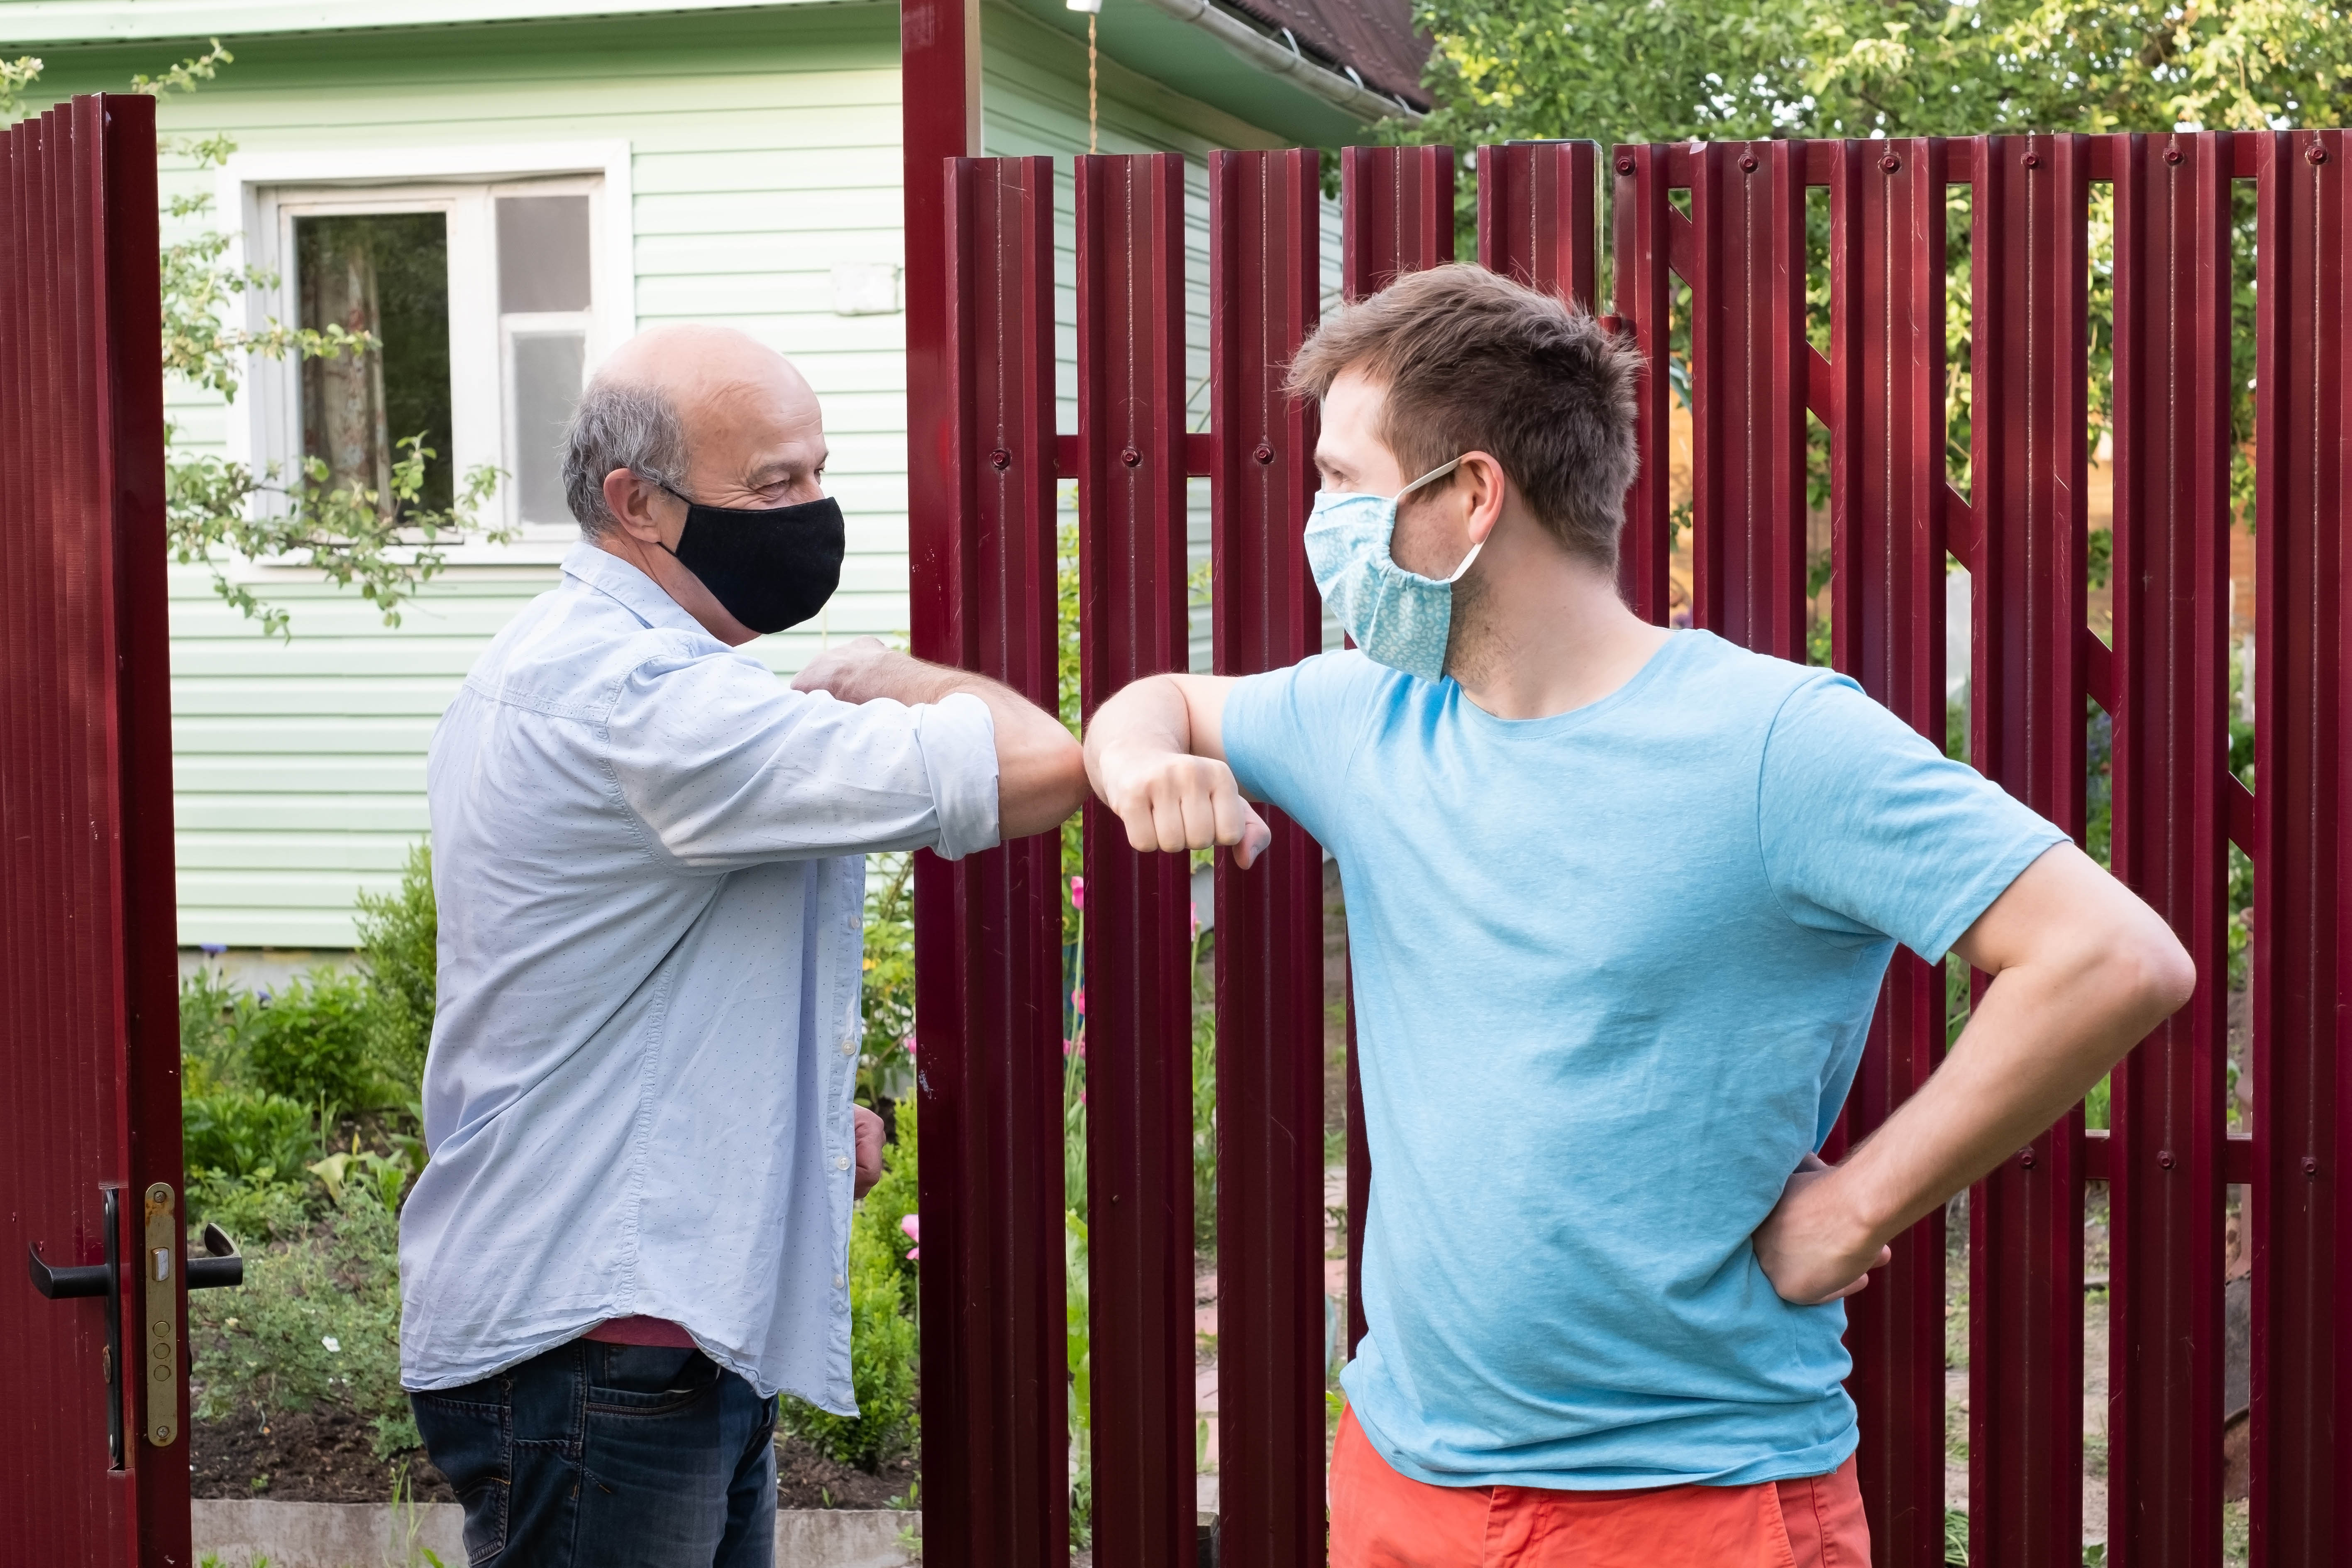 Neighbours offer each other support with an elbow bump